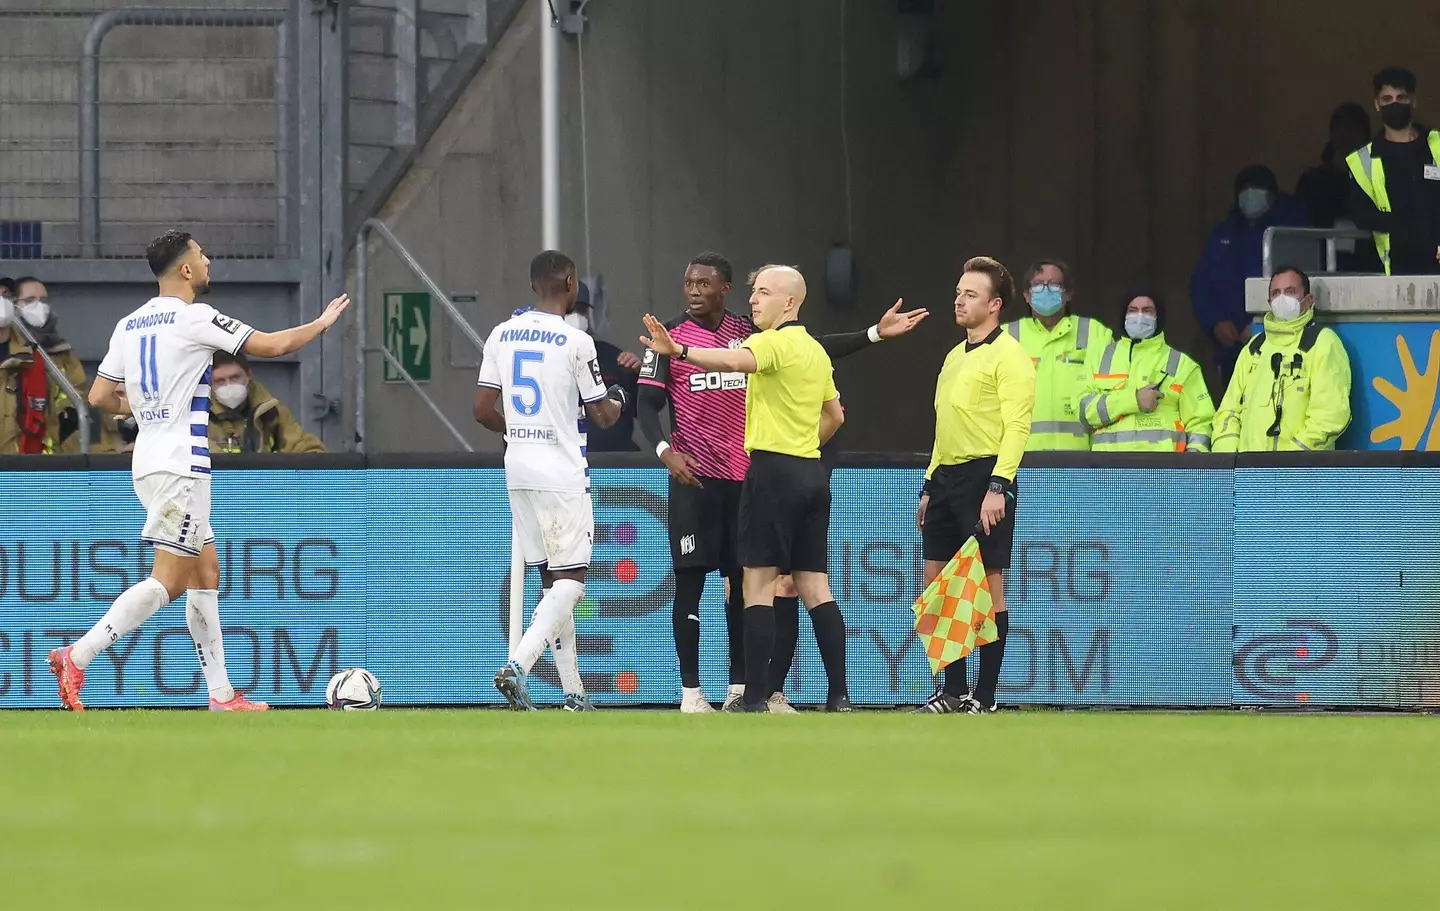 It is the first time that a professional match in Germany has been abandoned because of racism (Image credit: Alamy)